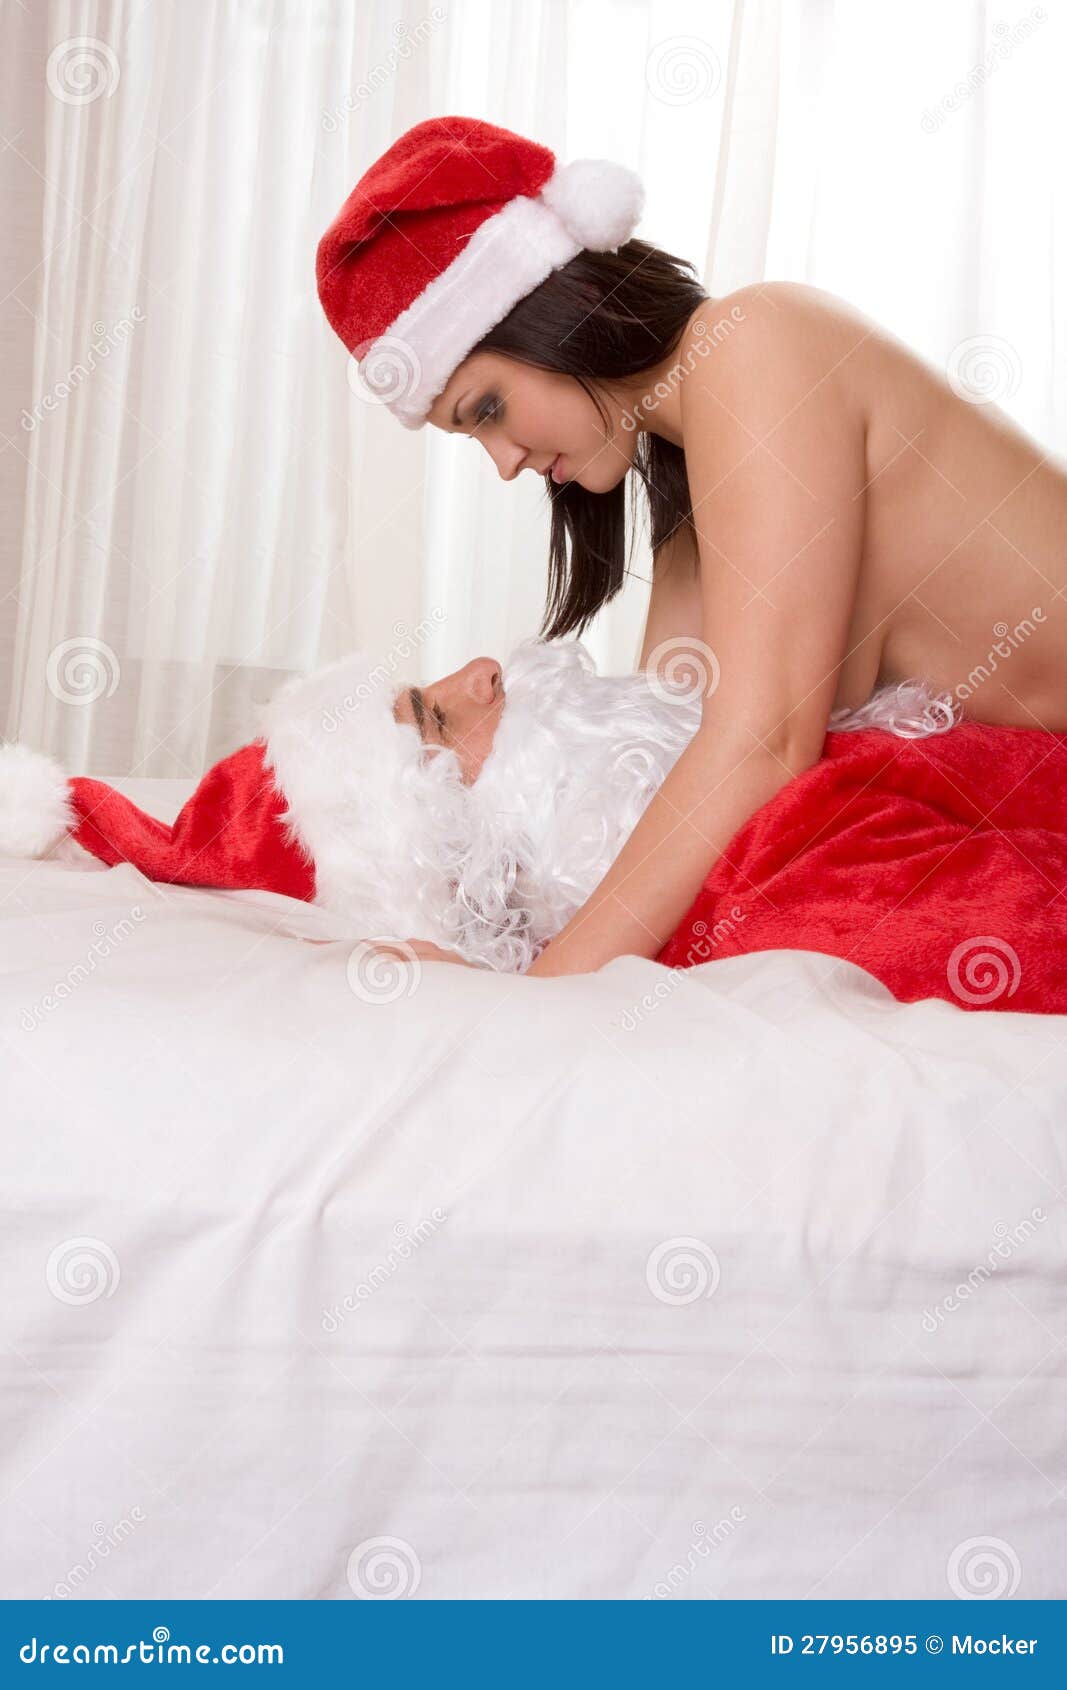 alicia chong recommends santa clause having sex pic